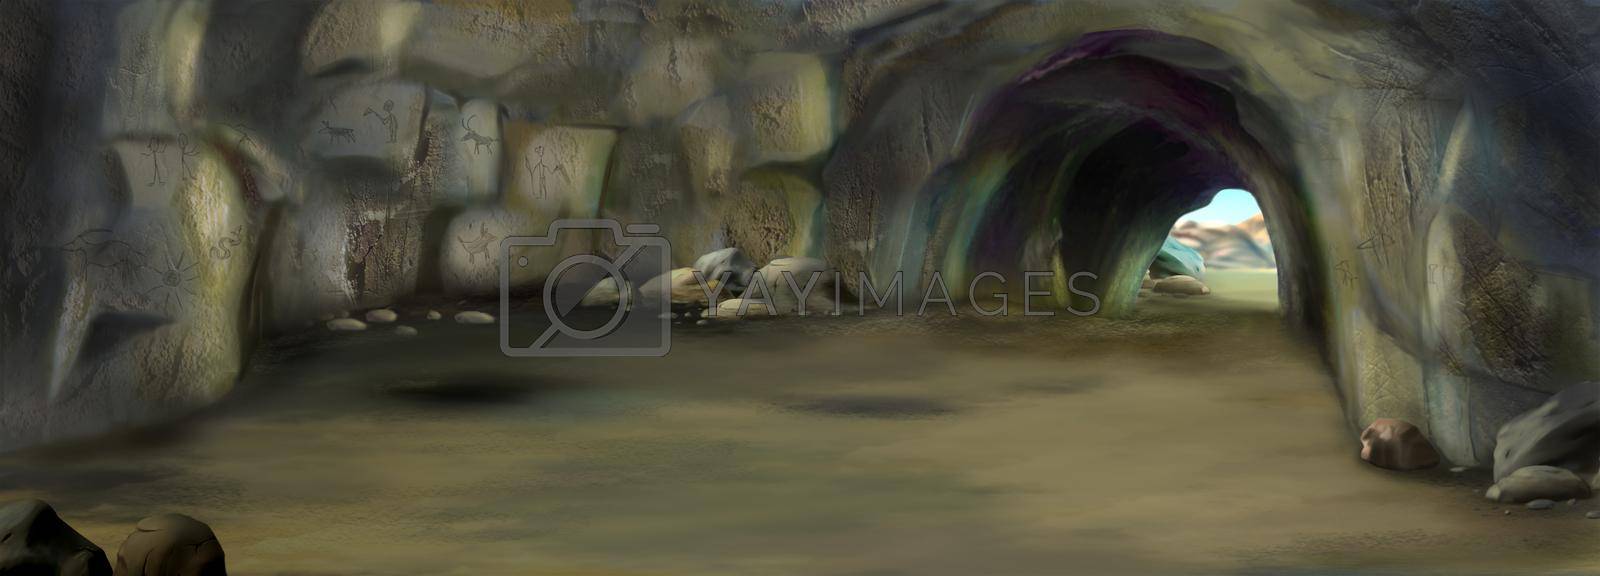 Large cave with drawings of ancient people on the walls. Digital Painting Background, Illustration.